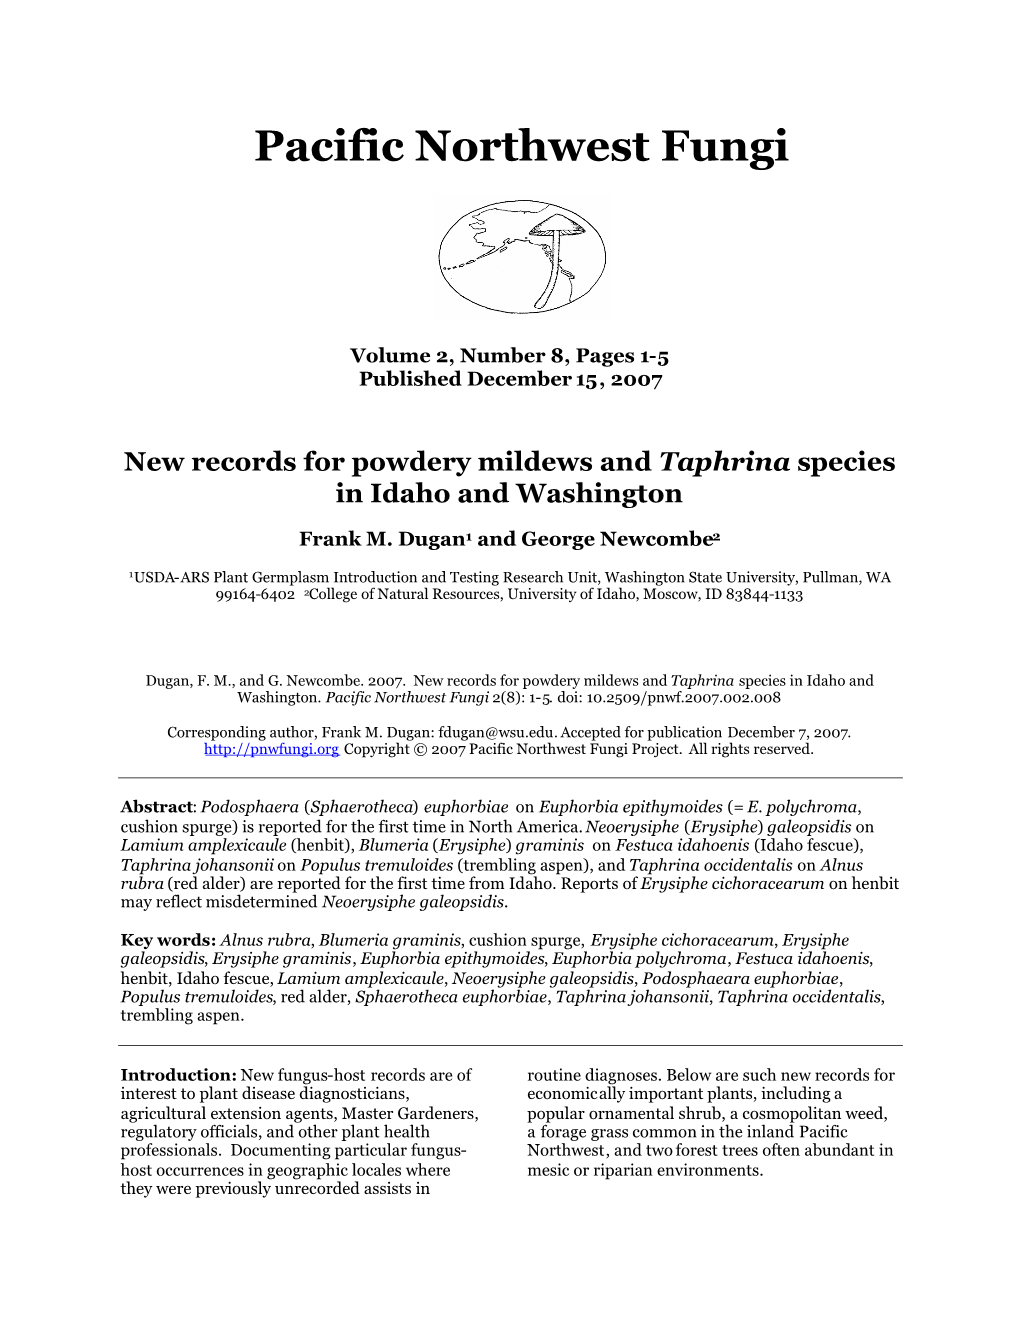 New Records for Powdery Mildews and Taphrina Species in Idaho and Washington